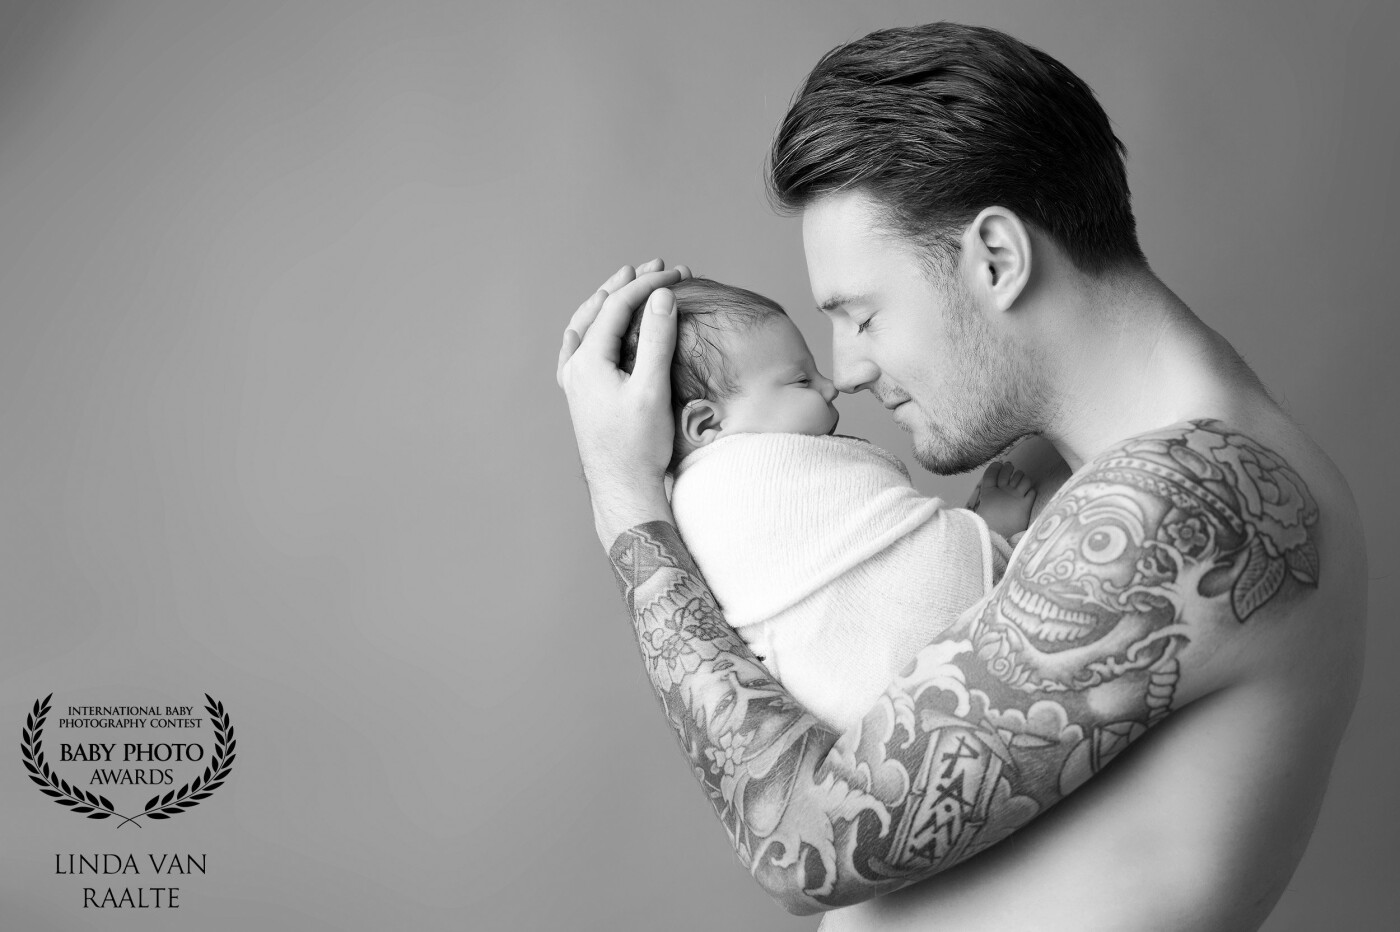 Love this picture of the little bay girl in dad's strong (tattooed arms) I love the contrast between the sweet little baby and the strong fierce arms of the father.